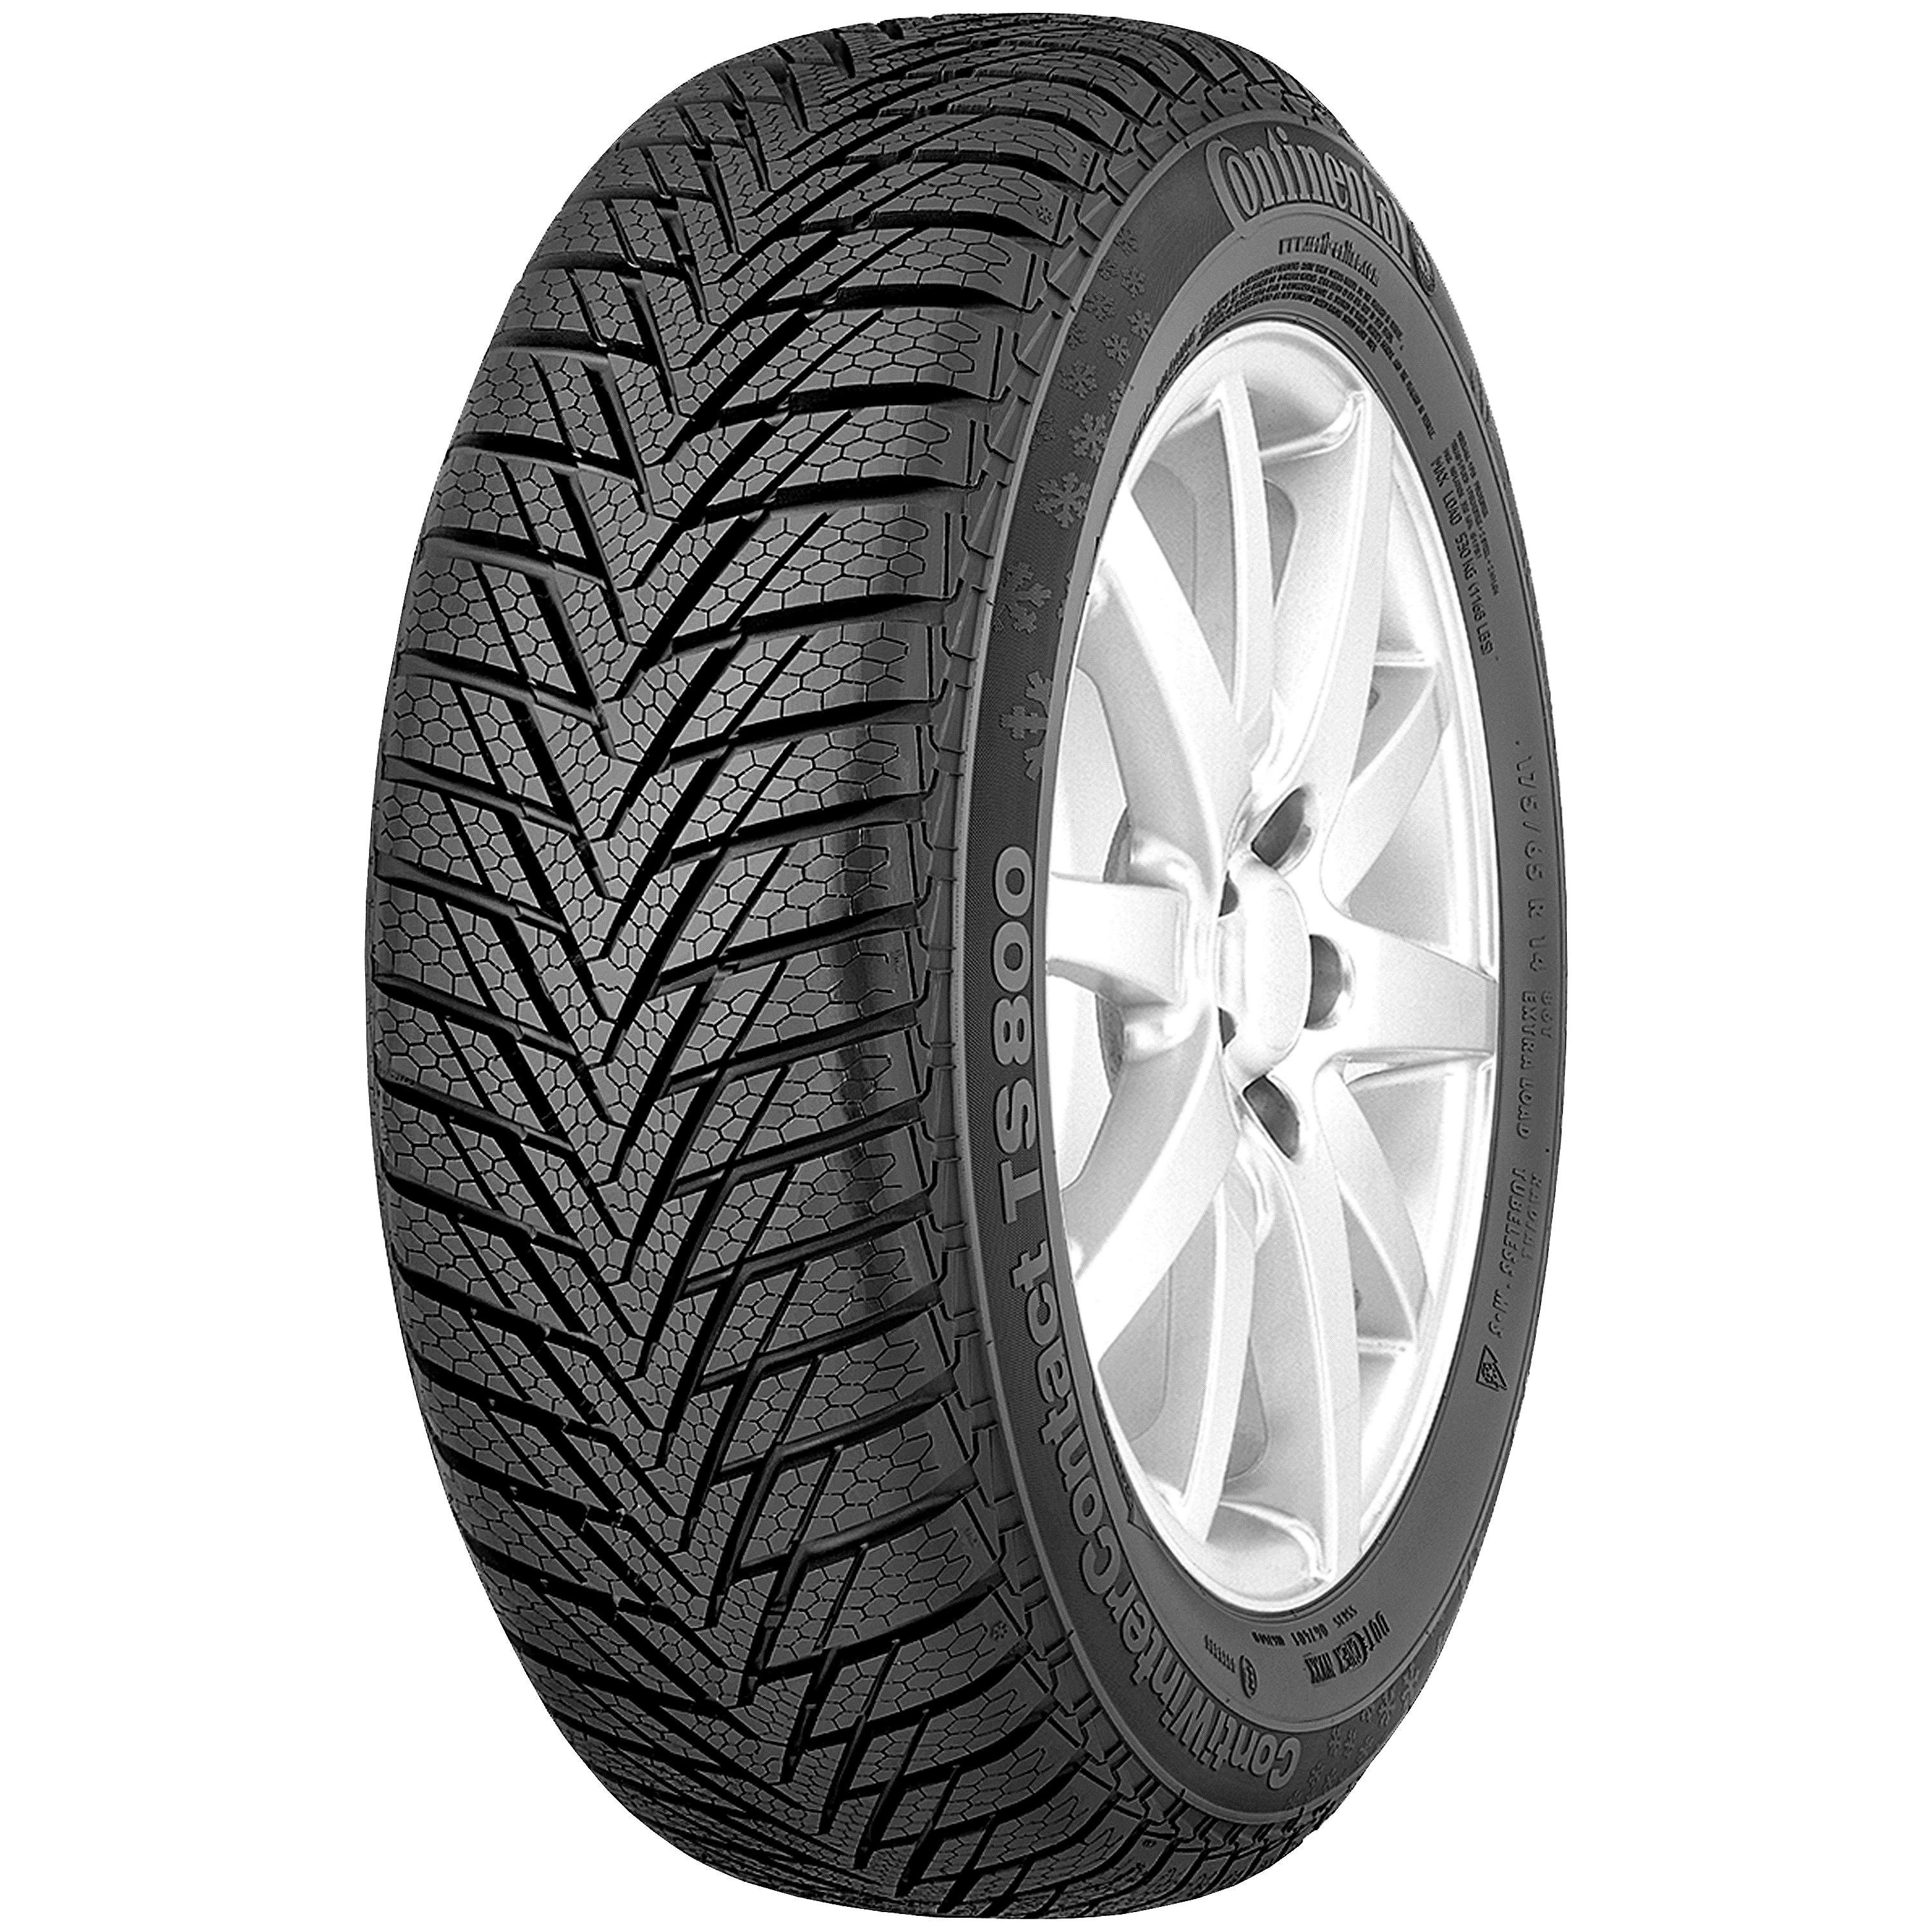 for category 800: ContiWinterContact compact winter Tailor-made tire the TS